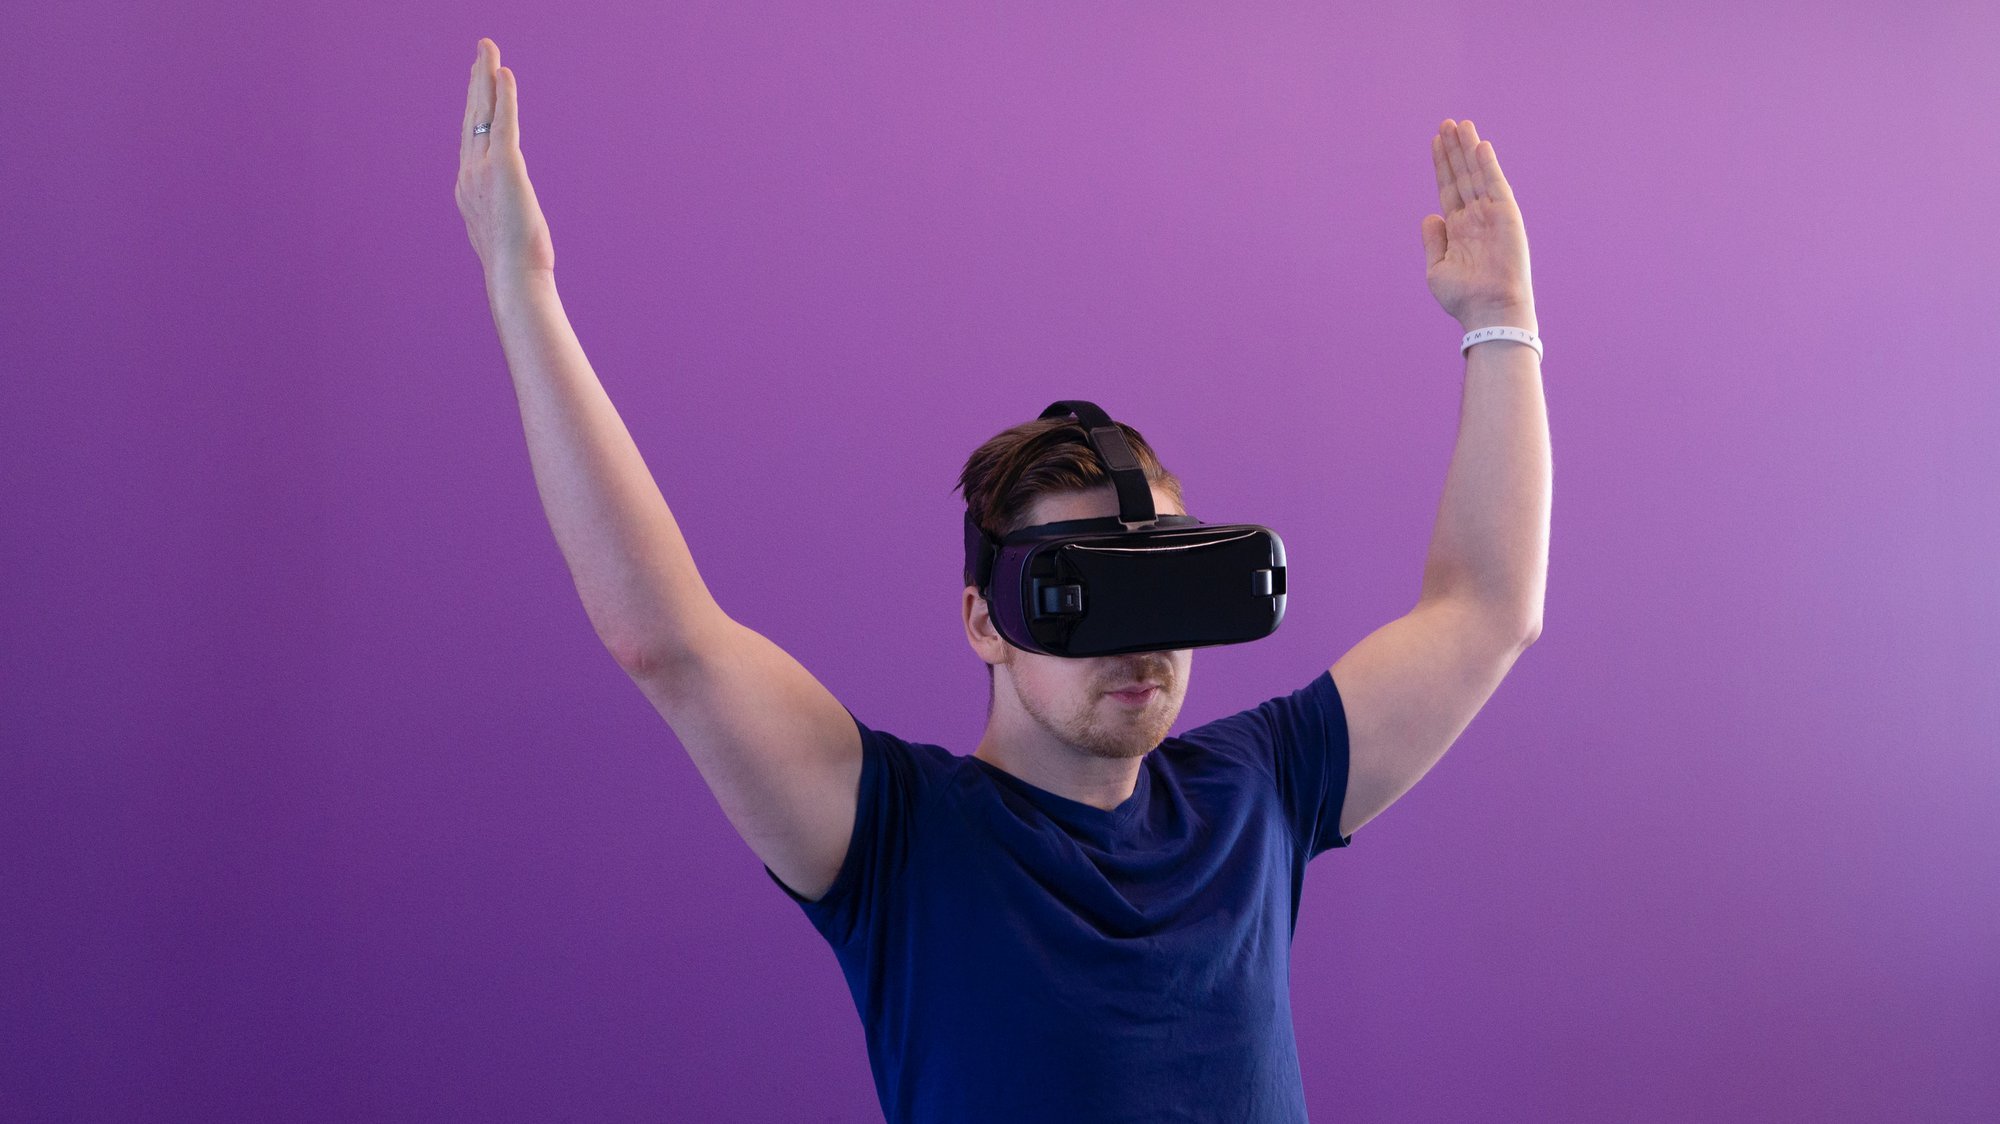 Top 5 Businesses in 2019 That Are Virtual Reality-Based